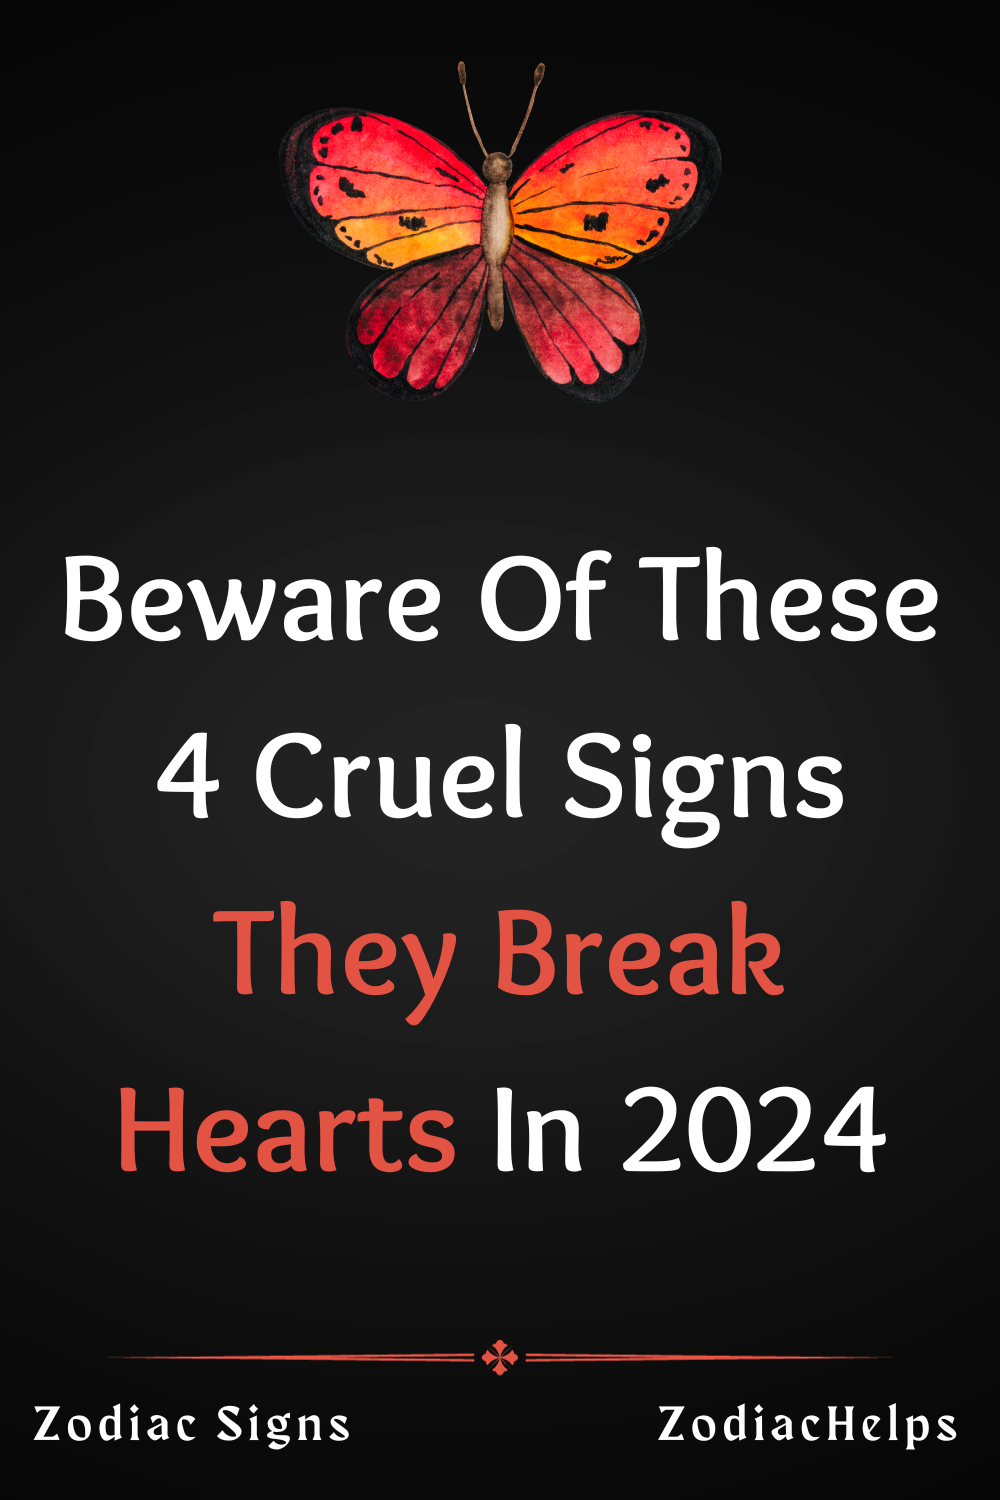 Beware Of These 4 Cruel Signs They Break Hearts In 2024